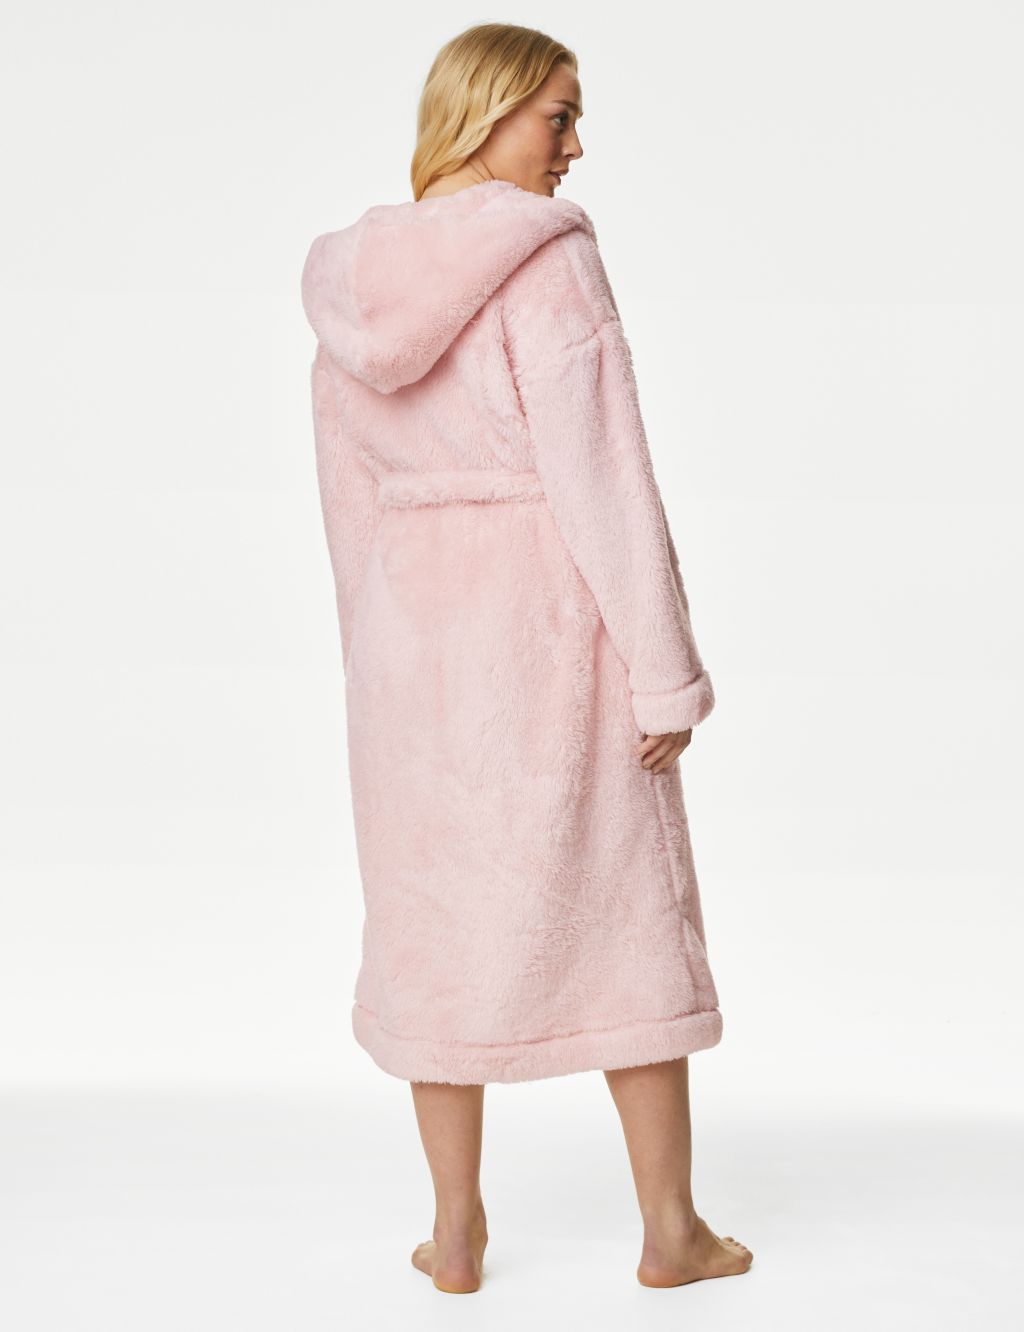 Fleece Hooded Dressing Gown image 4